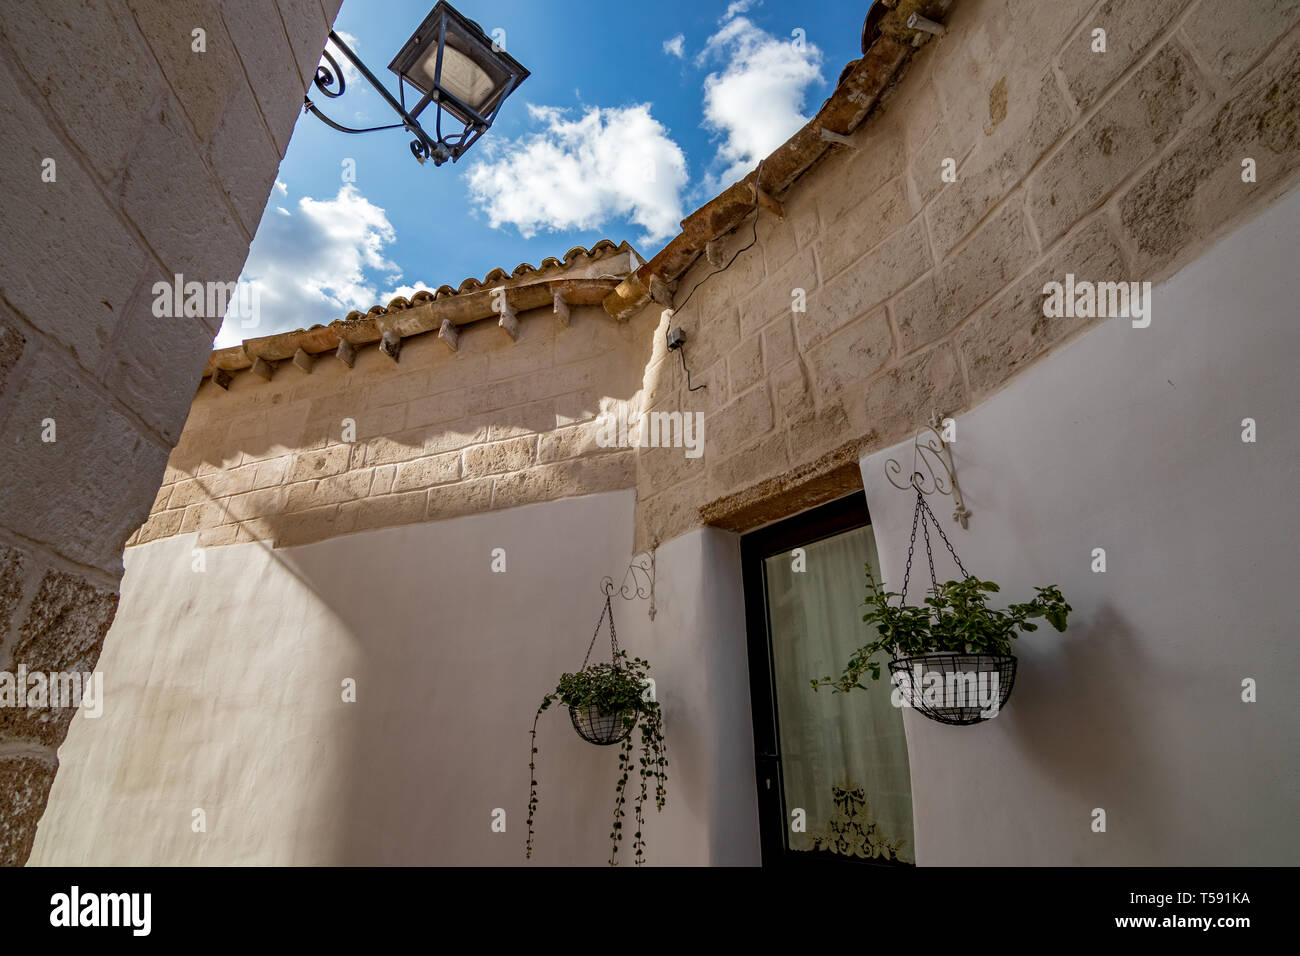 Two green potted plants grow hanging in two white pots around glass door in Laterza, Puglia region, Southern Italy in summertime, white wall background and puffy white clouds on blue sky Stock Photo